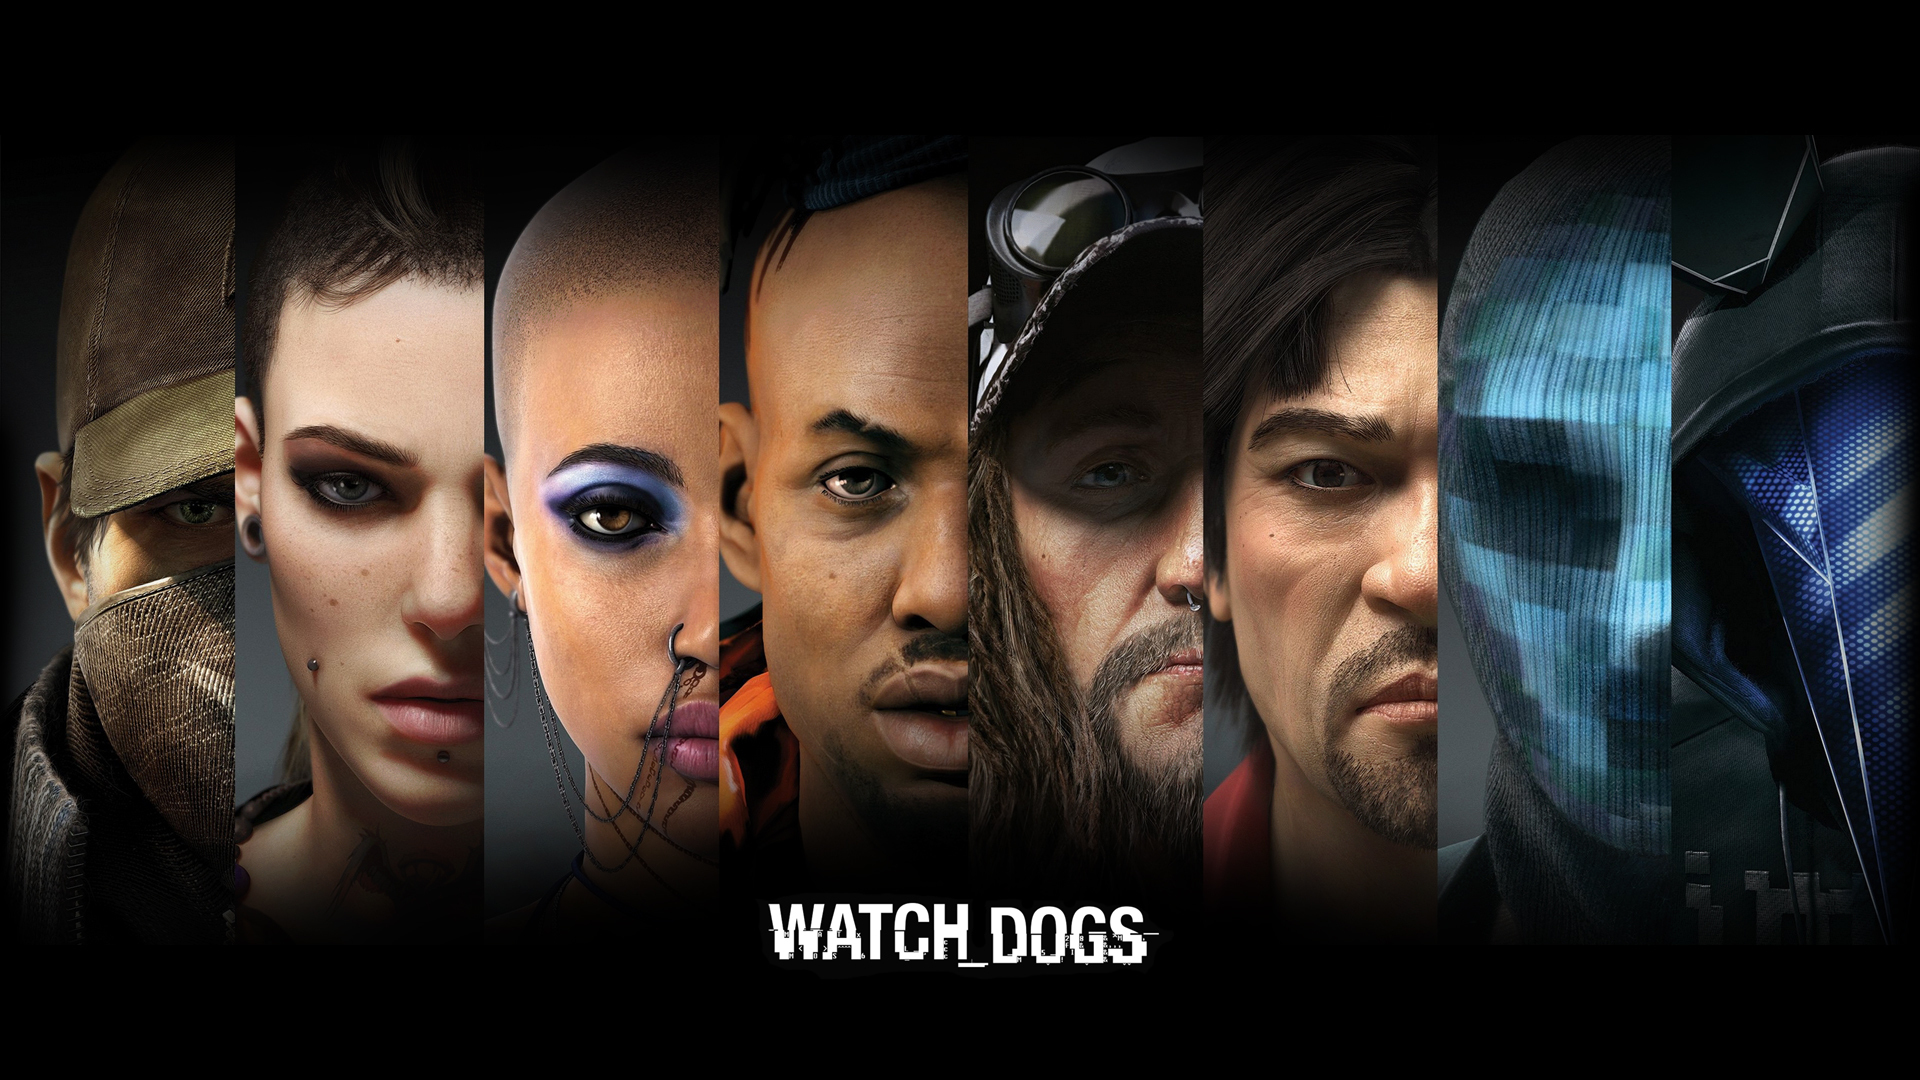 watch dogs, video game, aiden pearce